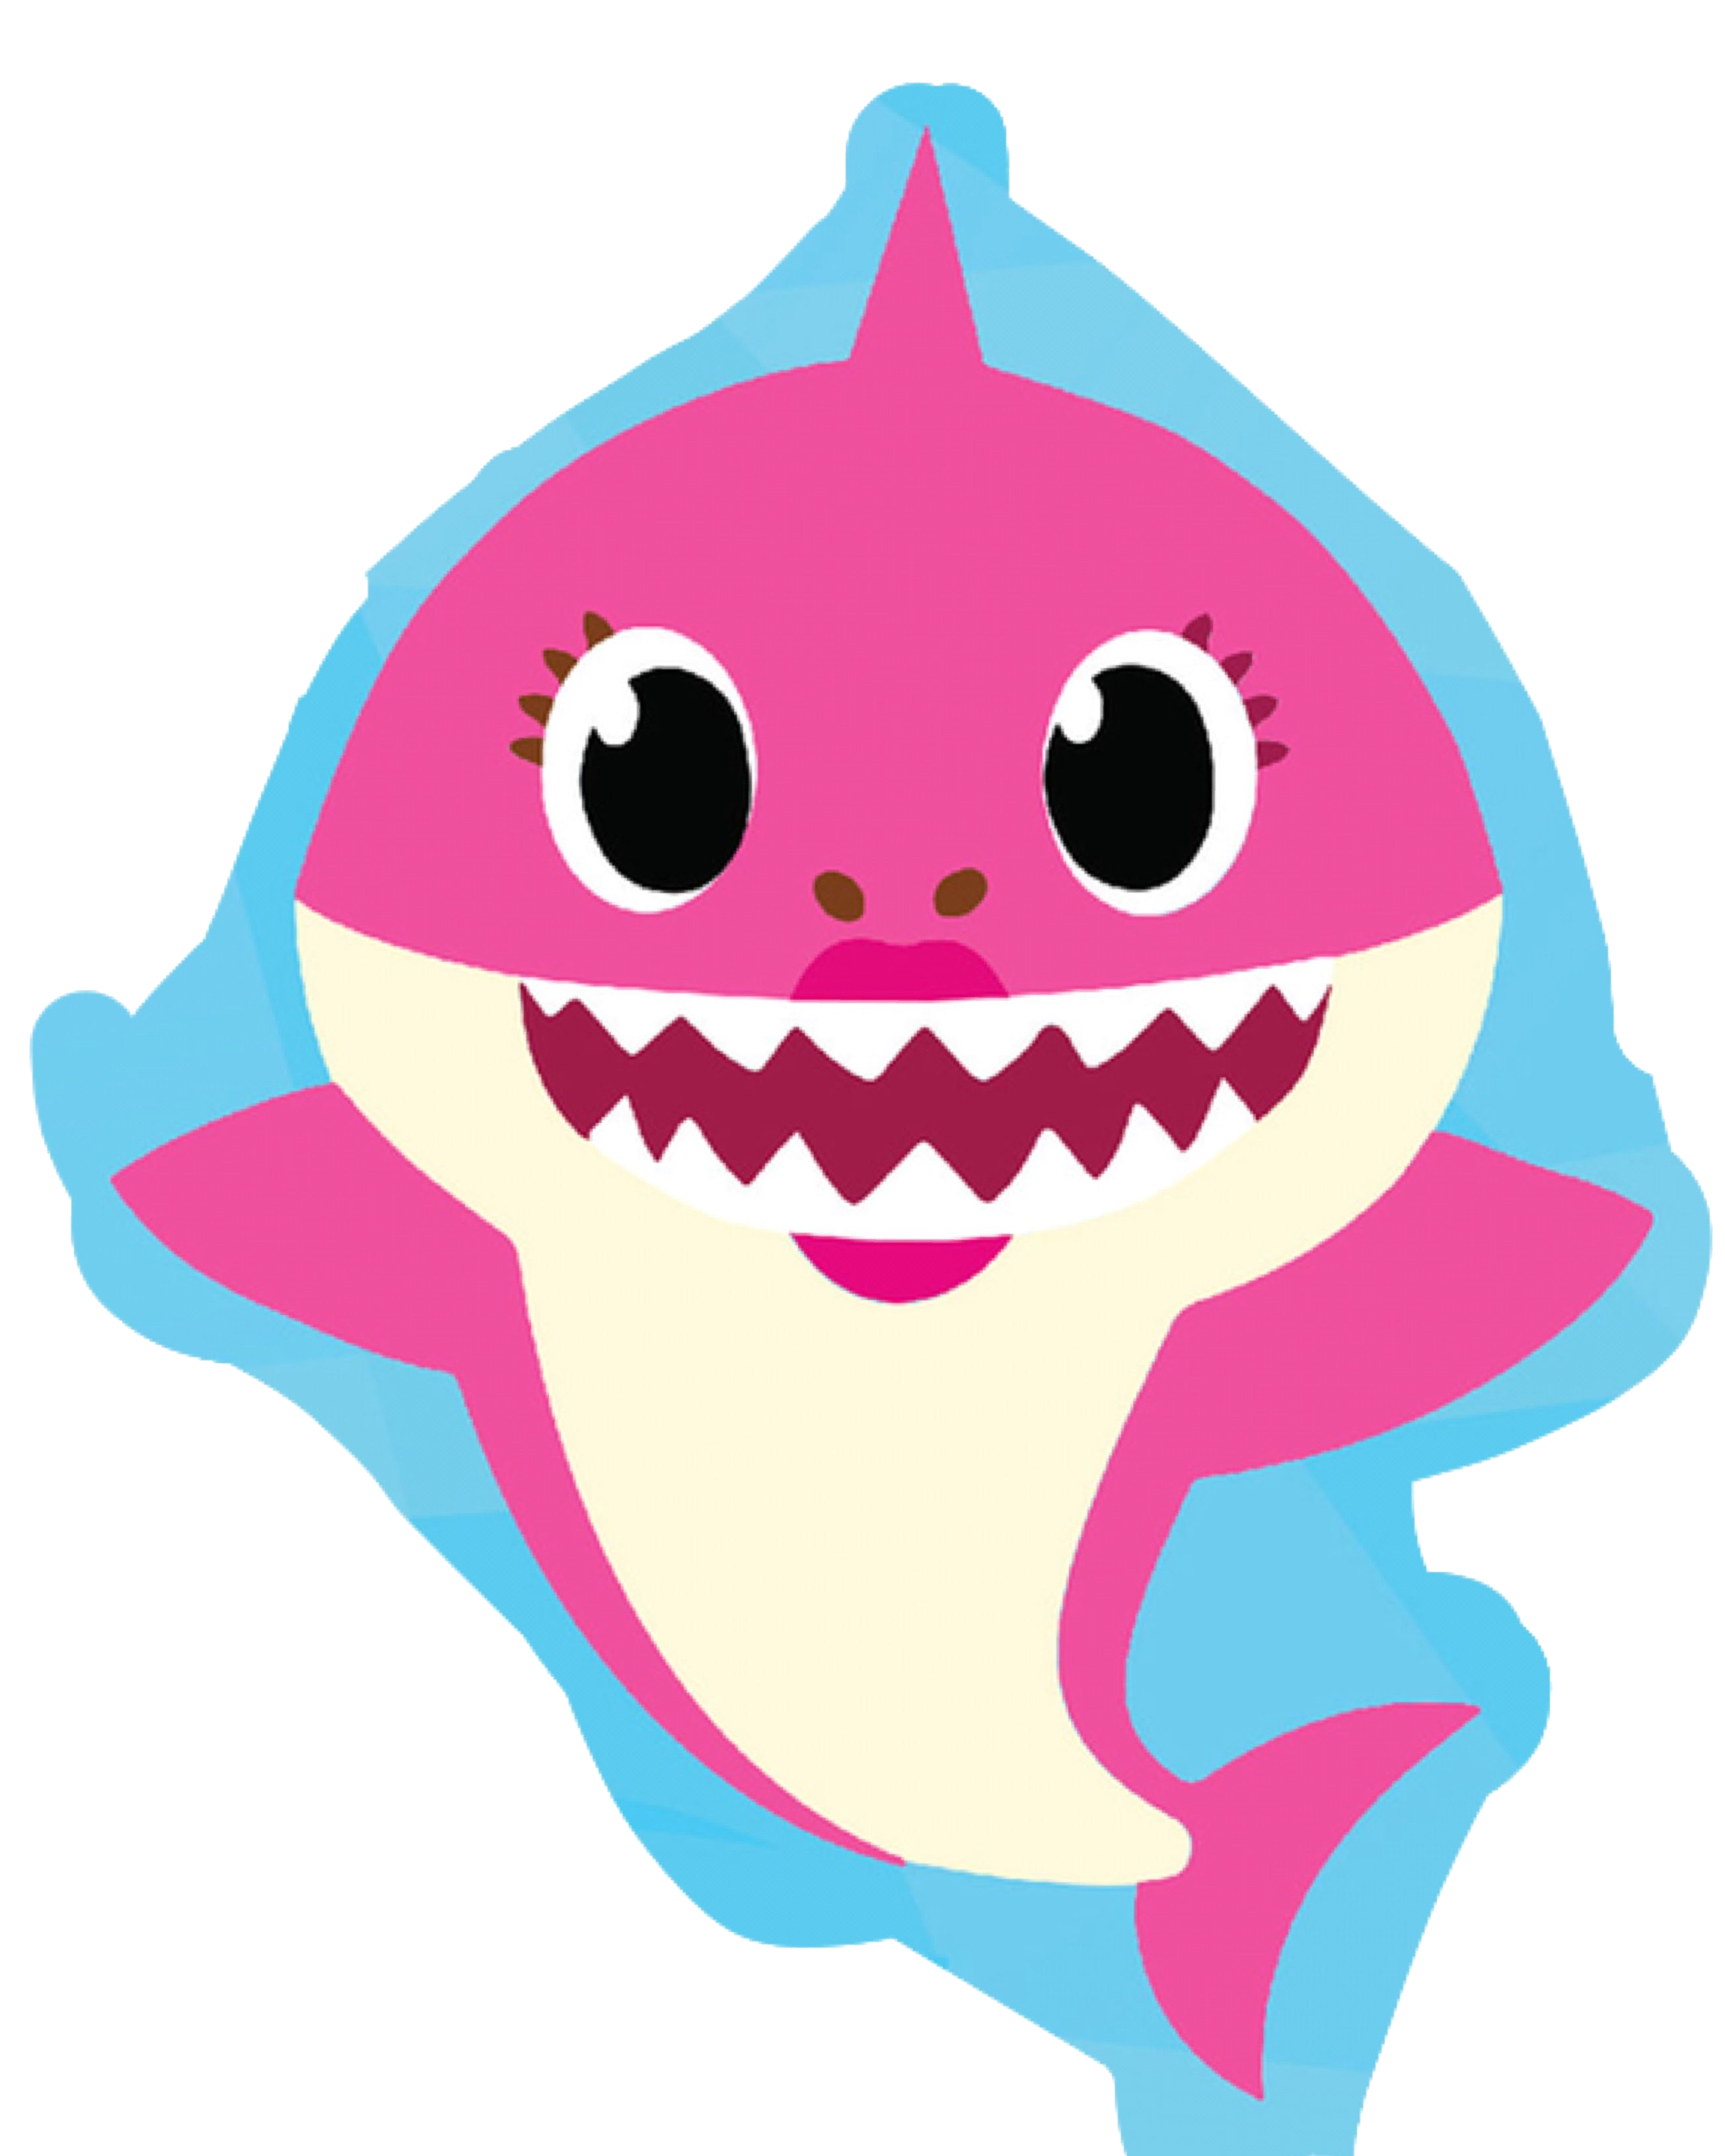 Baby Shark PNG images for free download.